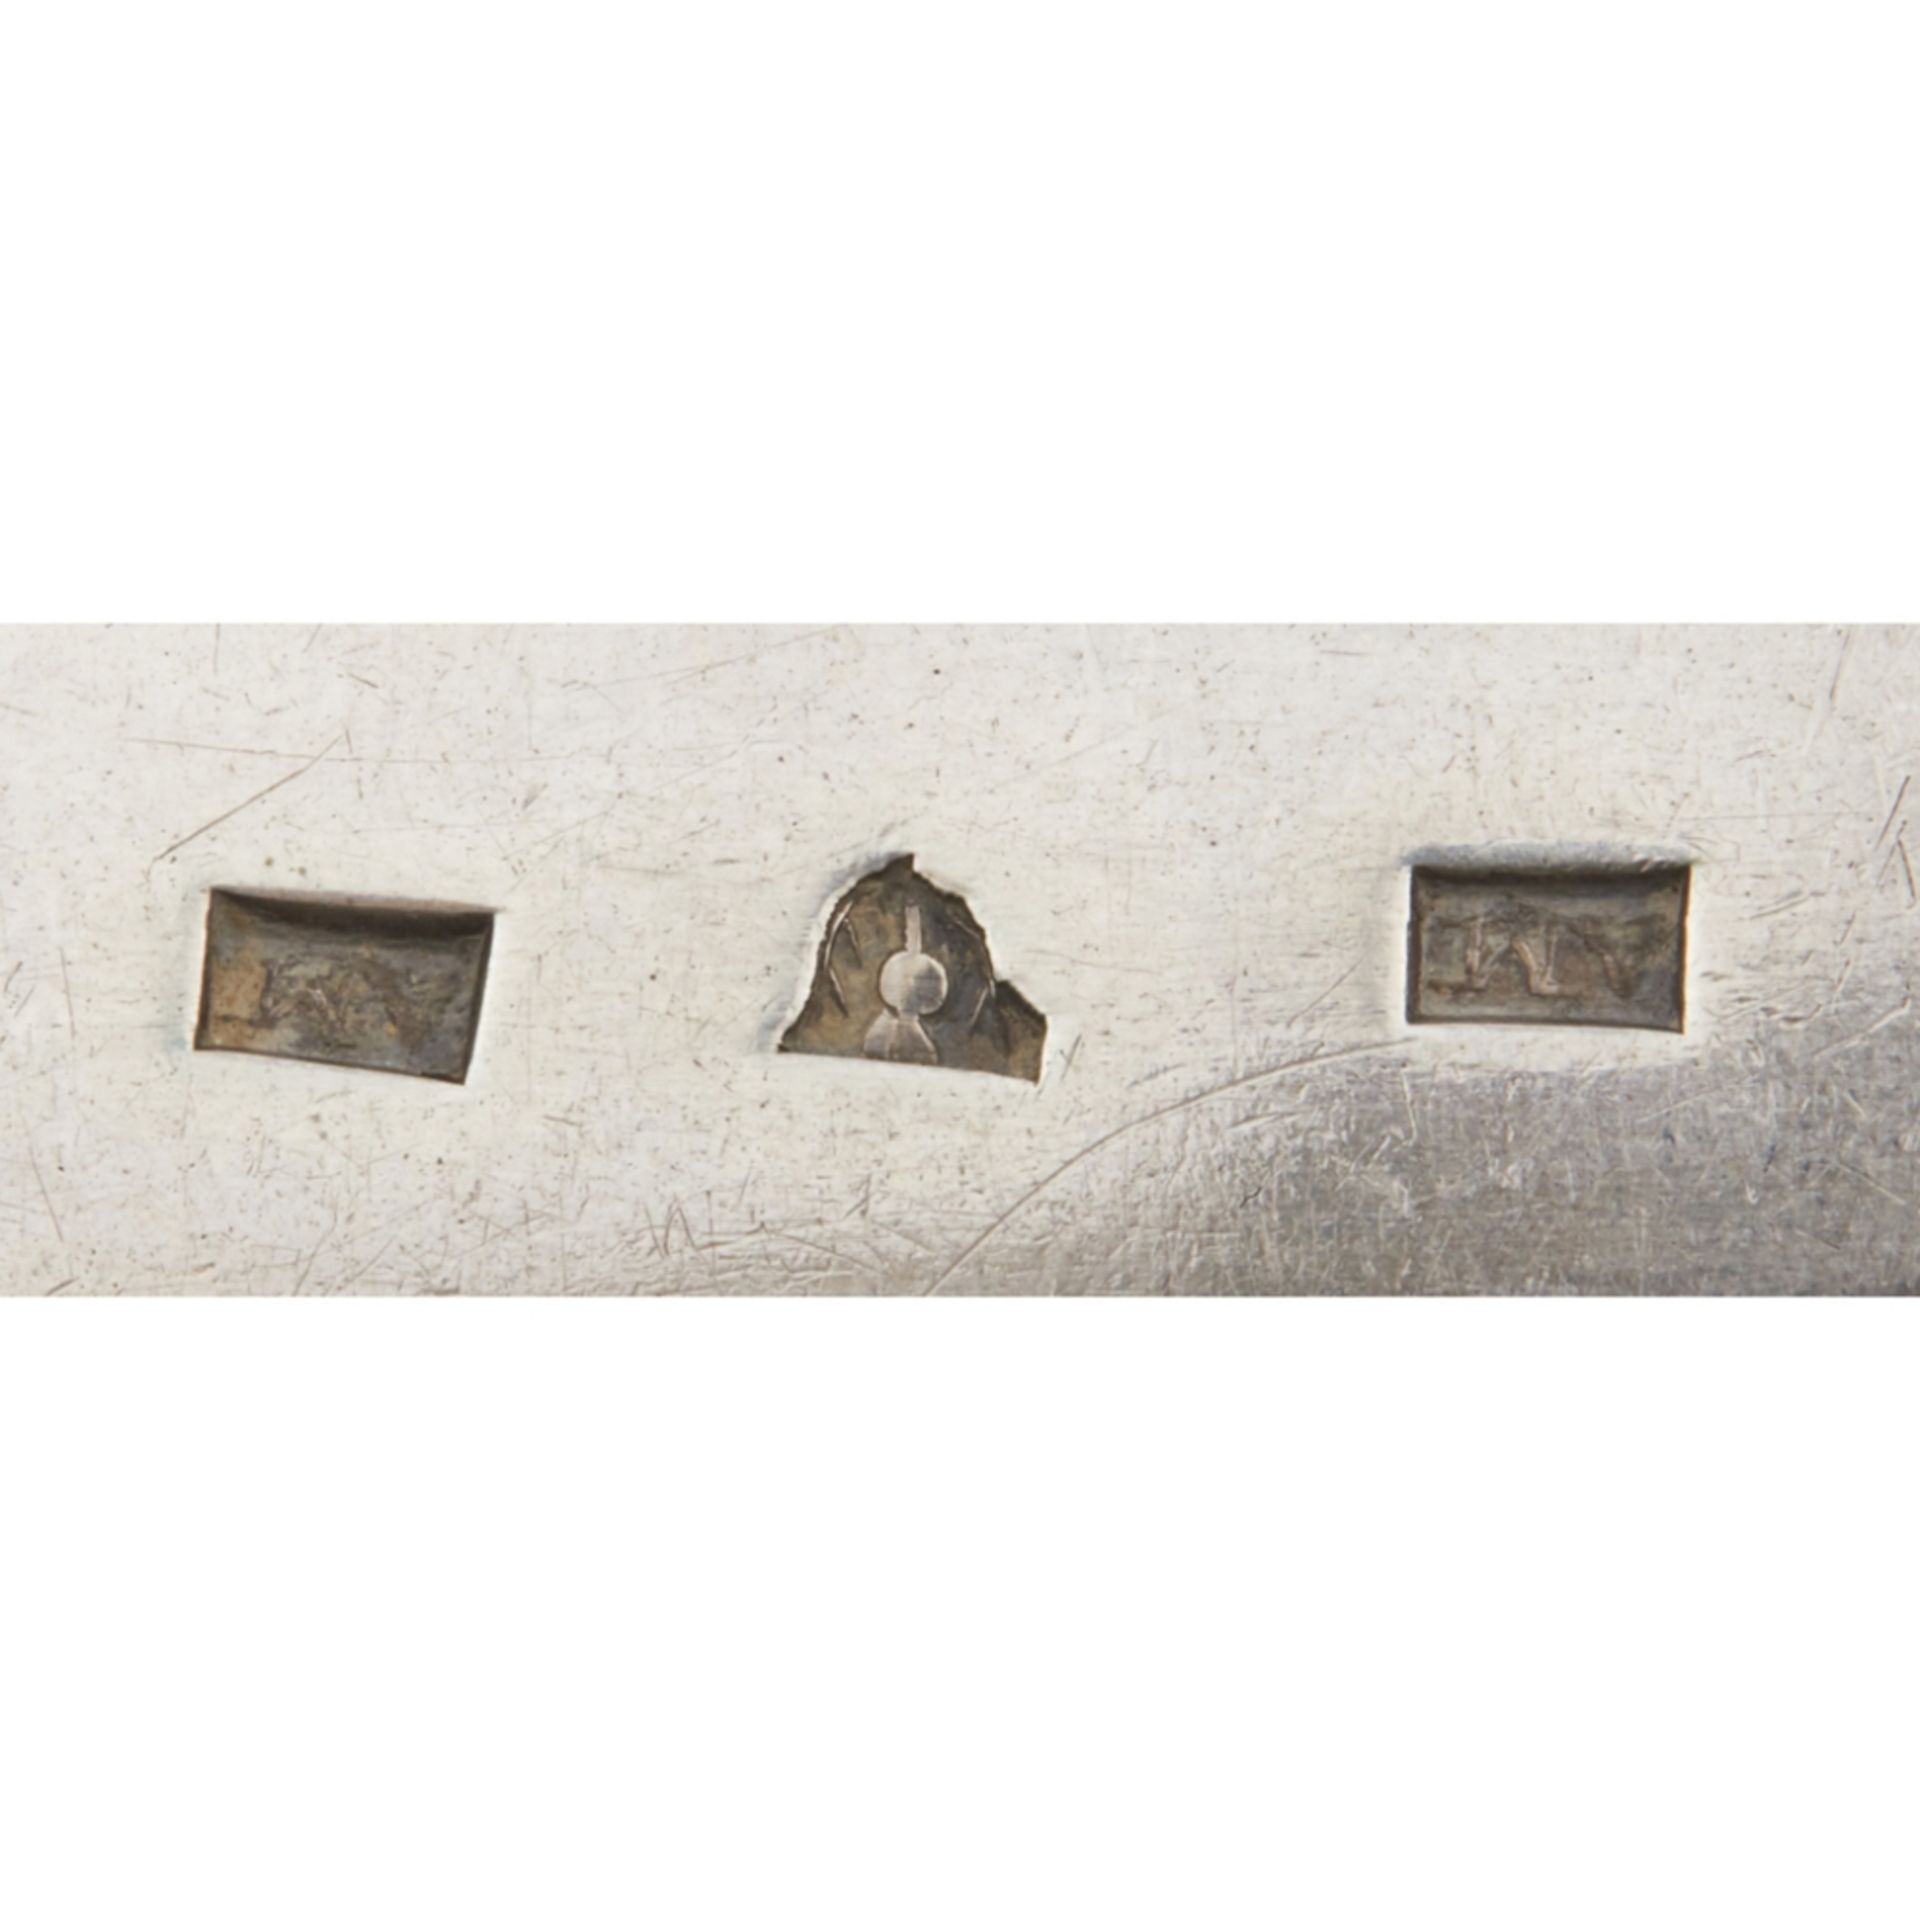 ABERDEEN - A SET OF FOUR SCOTTISH PROVINCIAL TABLESPOONS NATHANIAL GILLET marked NG, ABDN, of Old - Image 5 of 9